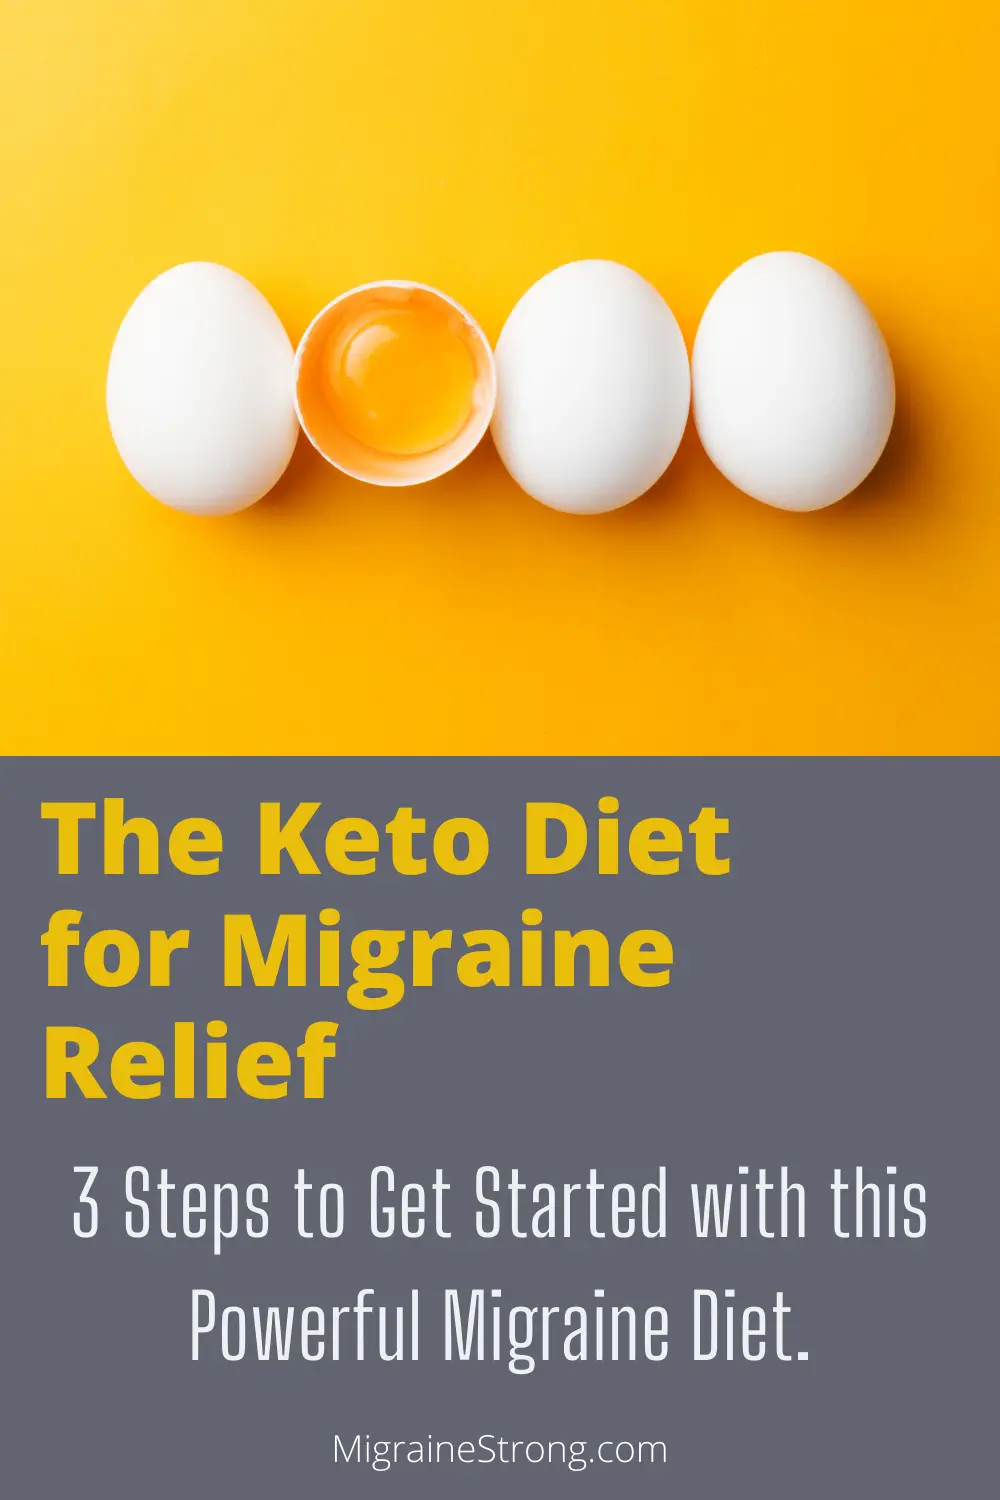 Keto Diet for Migraine - How to Get Started